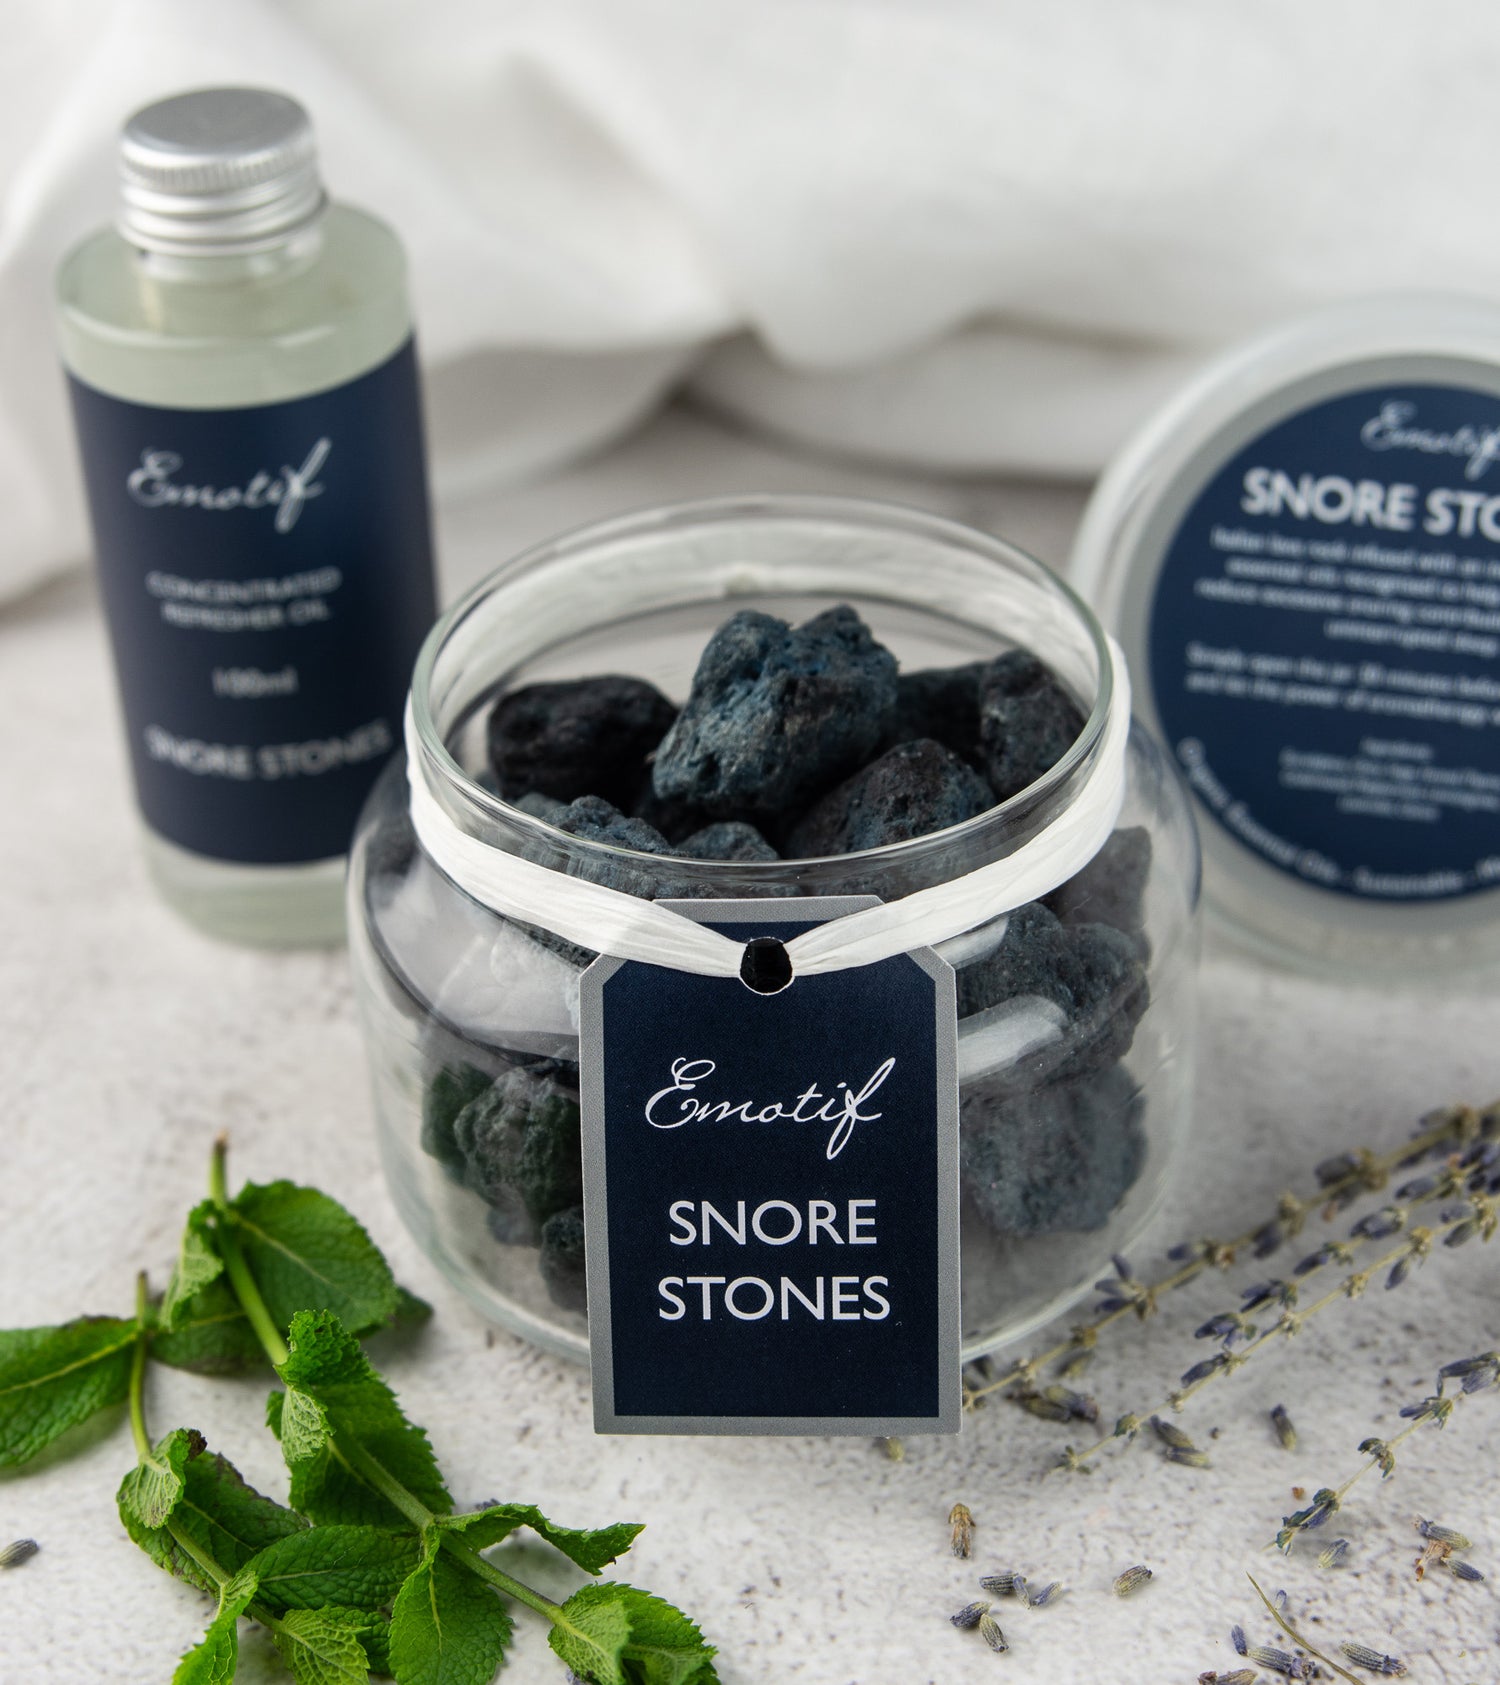 CORIN CRAFT SNORE STONE AND OIL GIFT SET Packshot